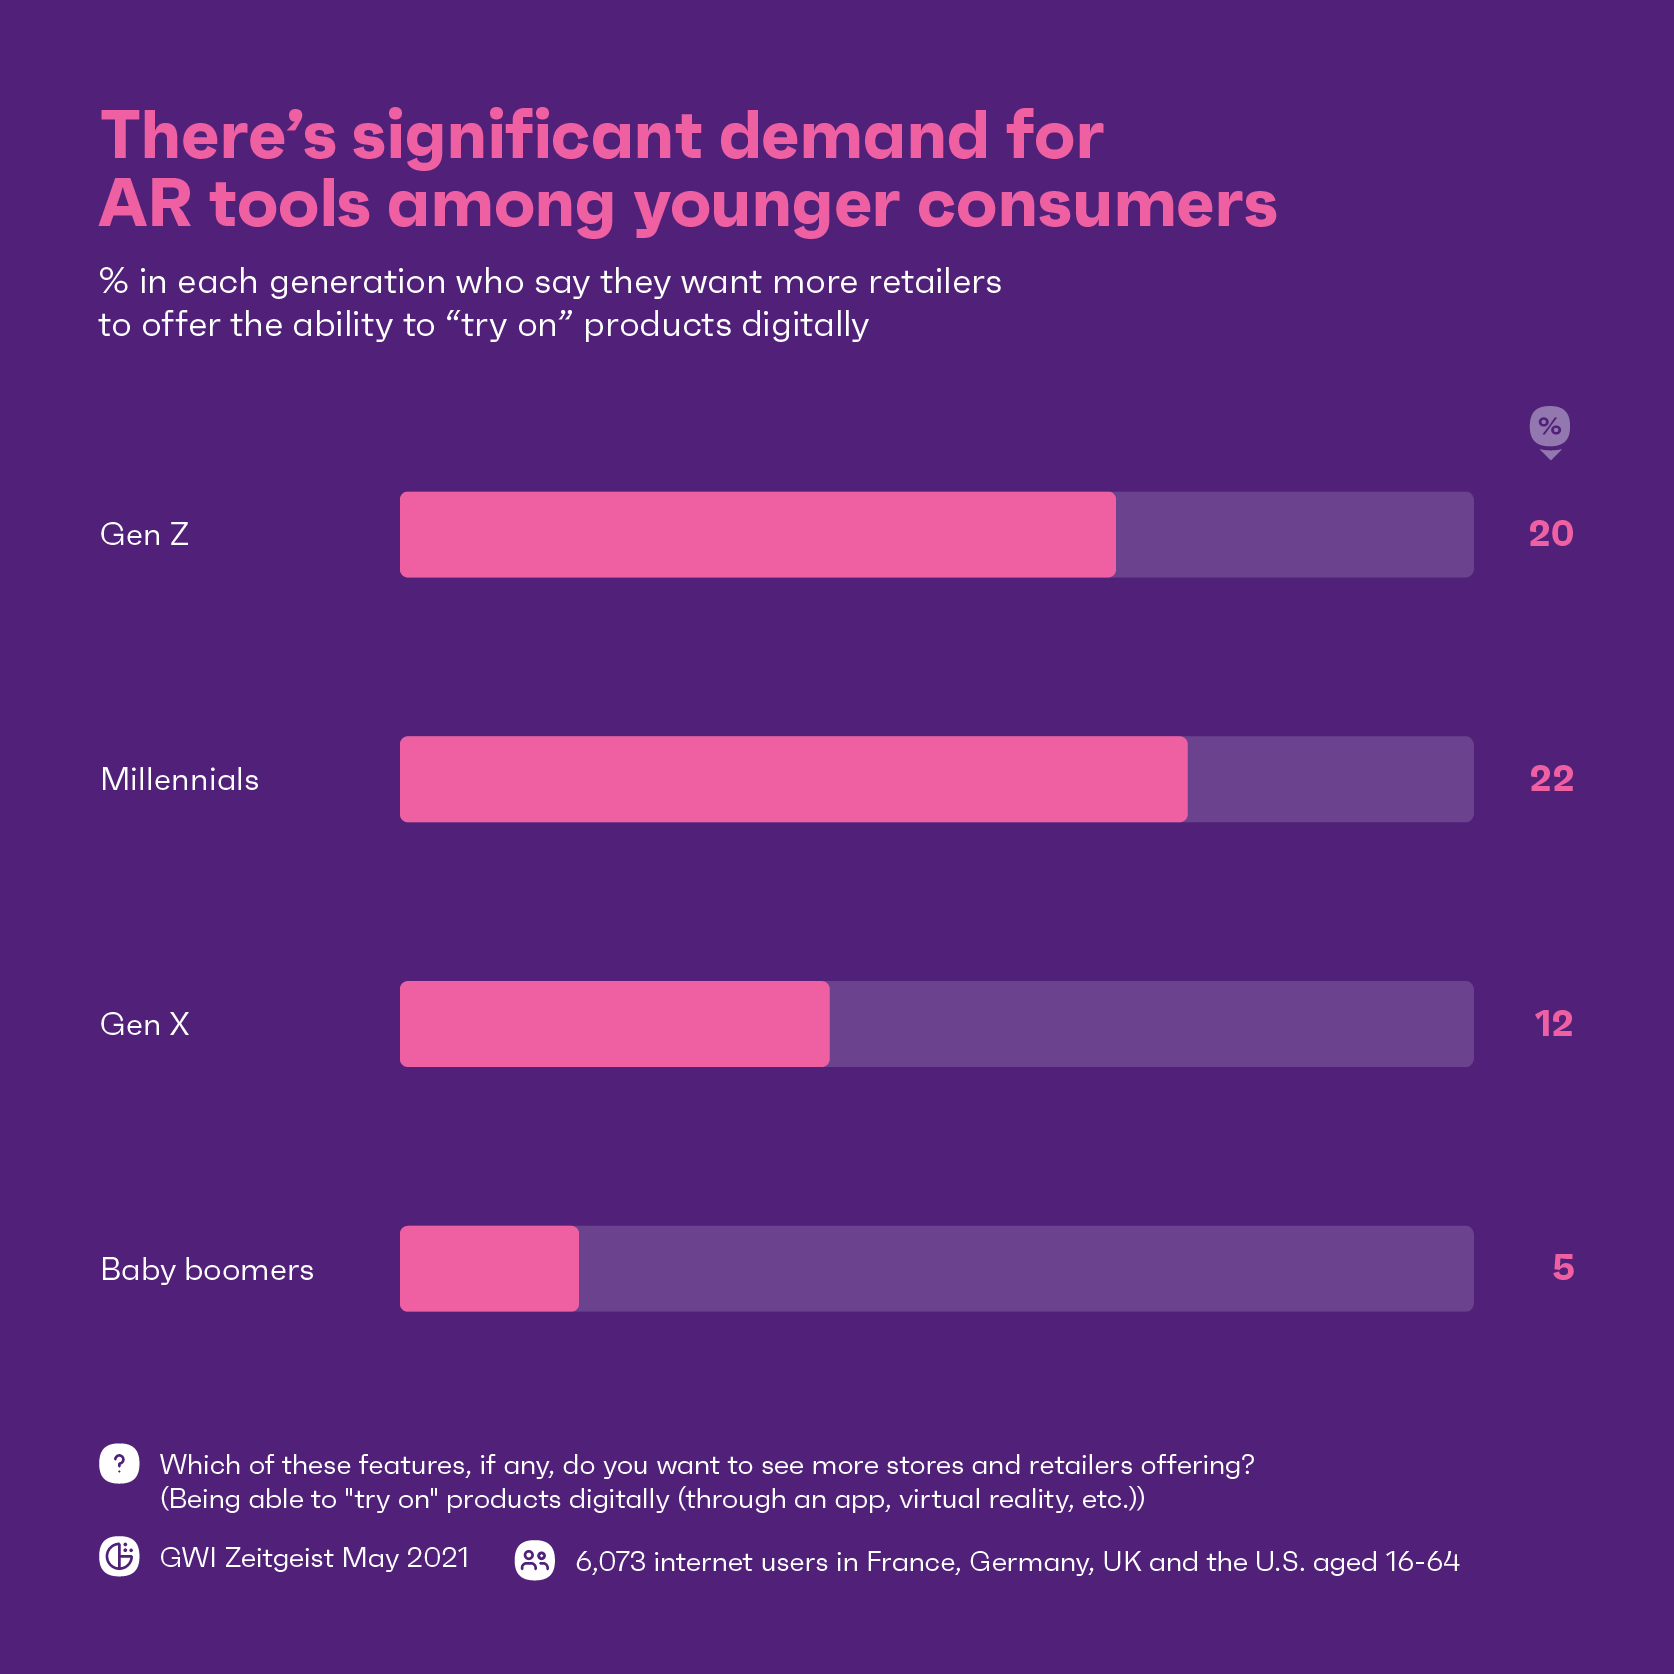 Chart showing the demand for AR tools among younger consumers